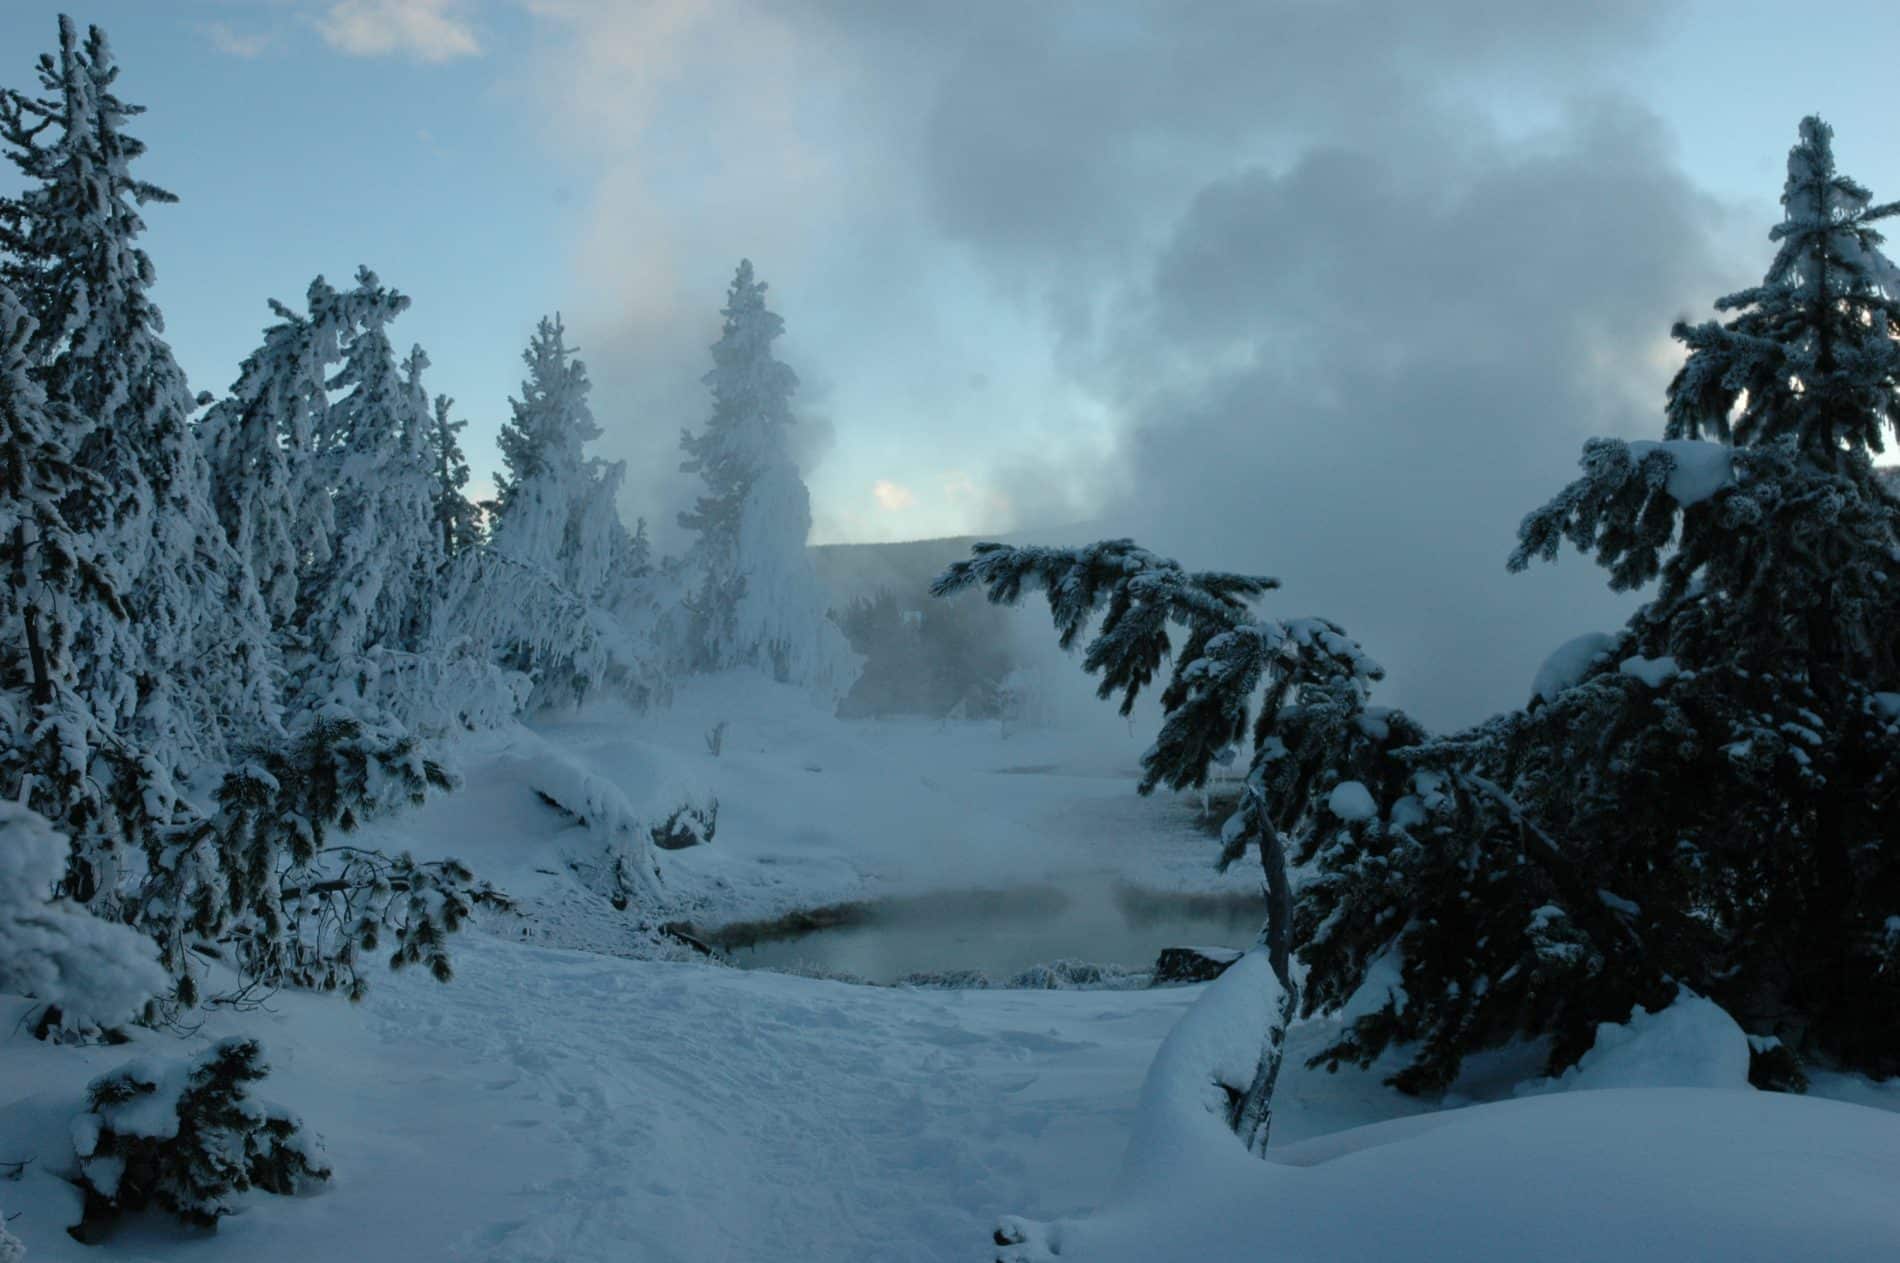 Yellowstone National Park with snow and a steaming pool